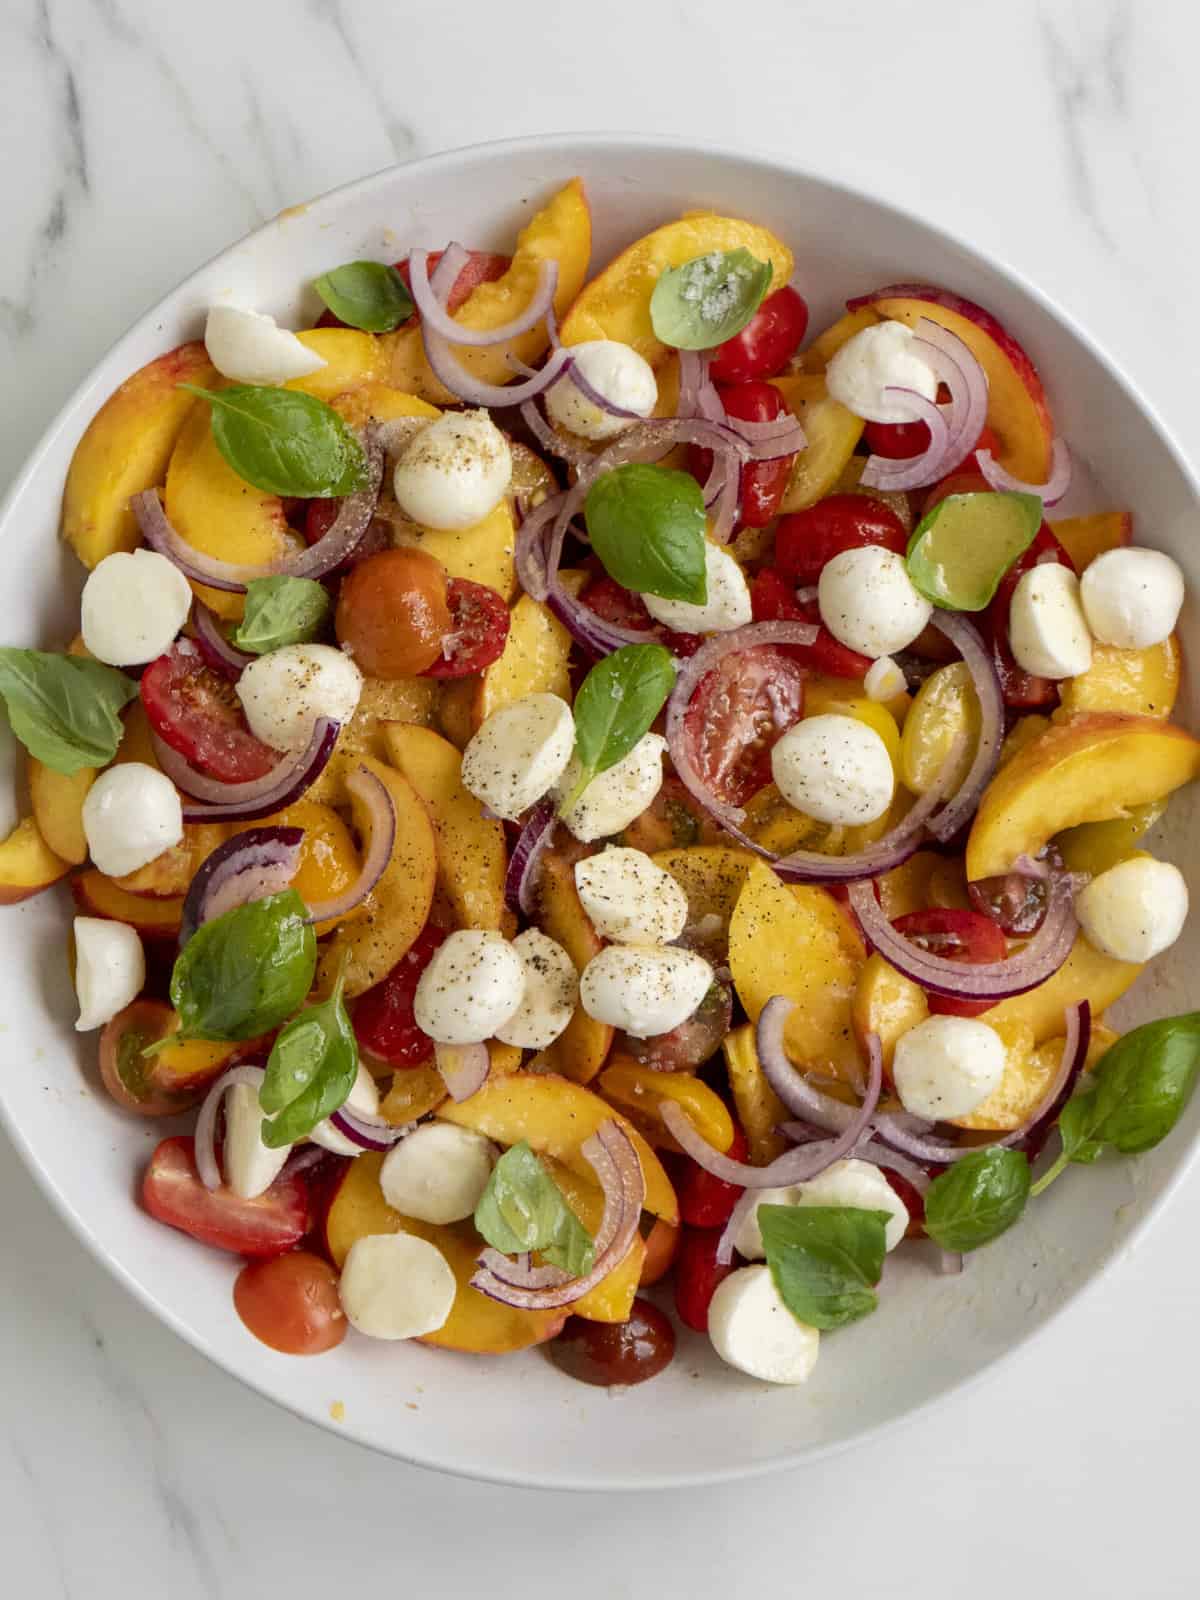 A salad bowl full of stone fruit, tomatoes, mozzarella, and red onions.  